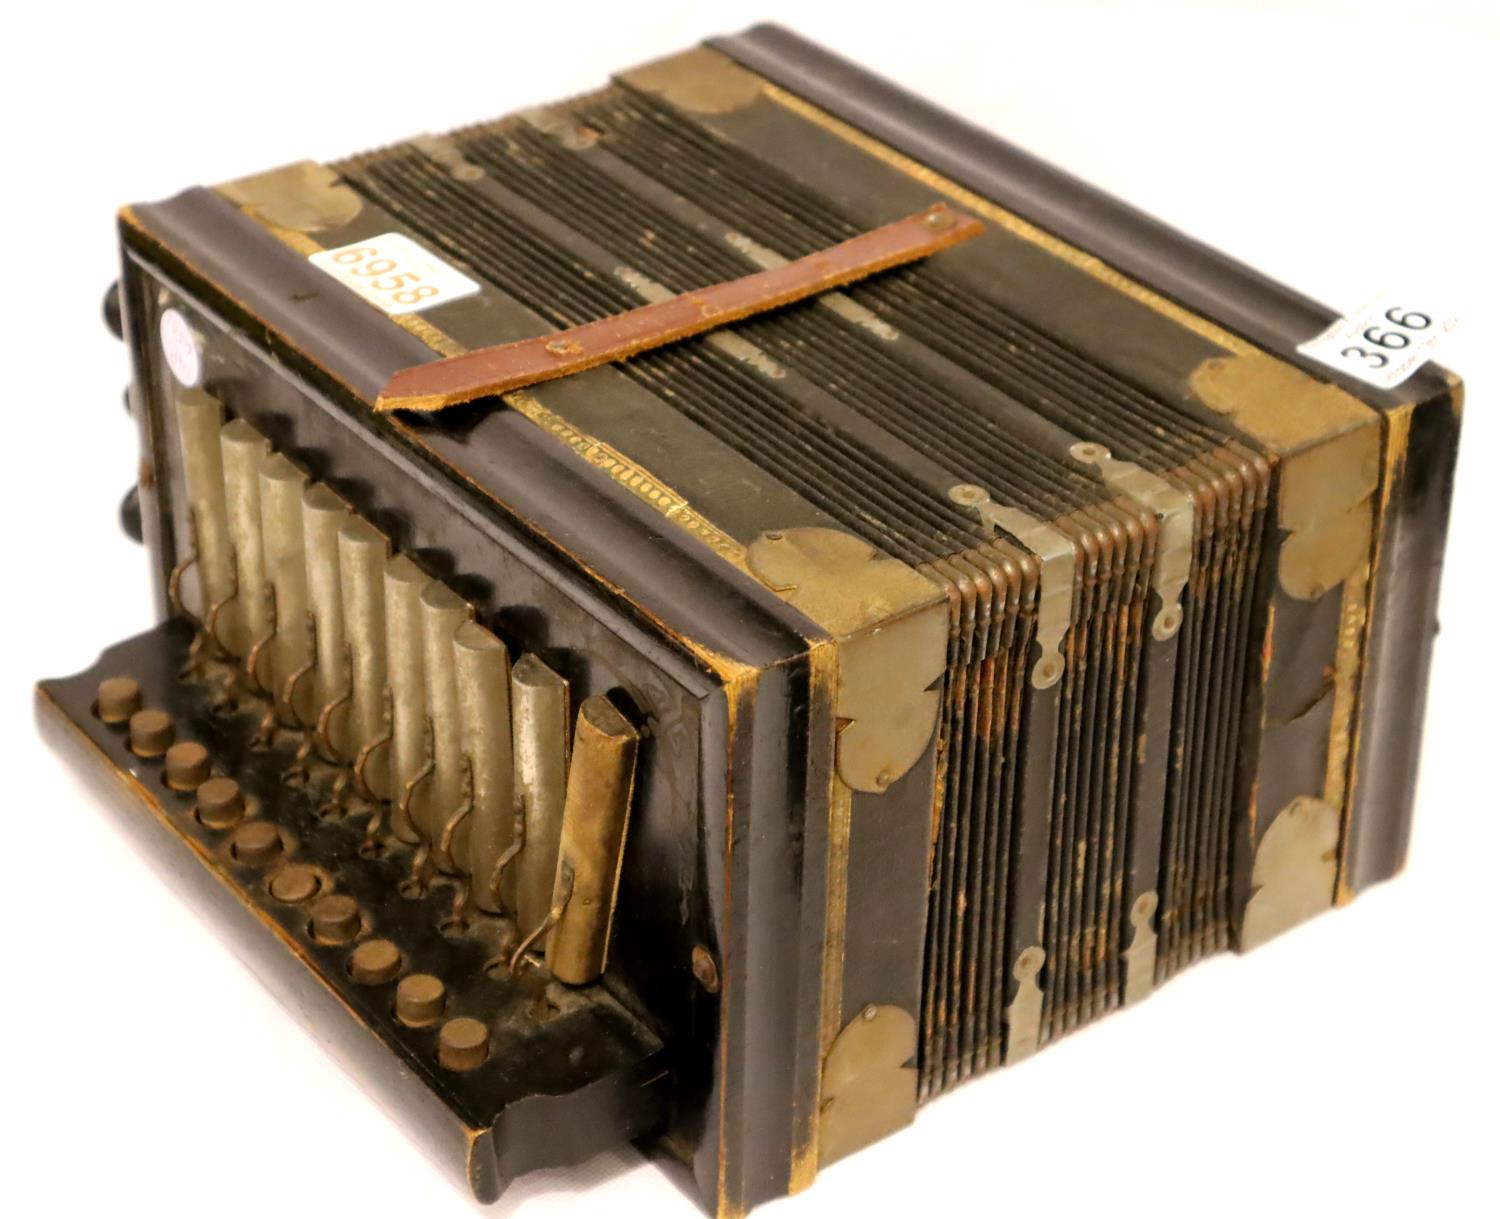 Small vintage accordion/squeeze box. Not available for in-house P&P, contact Paul O'Hea at Mailboxes